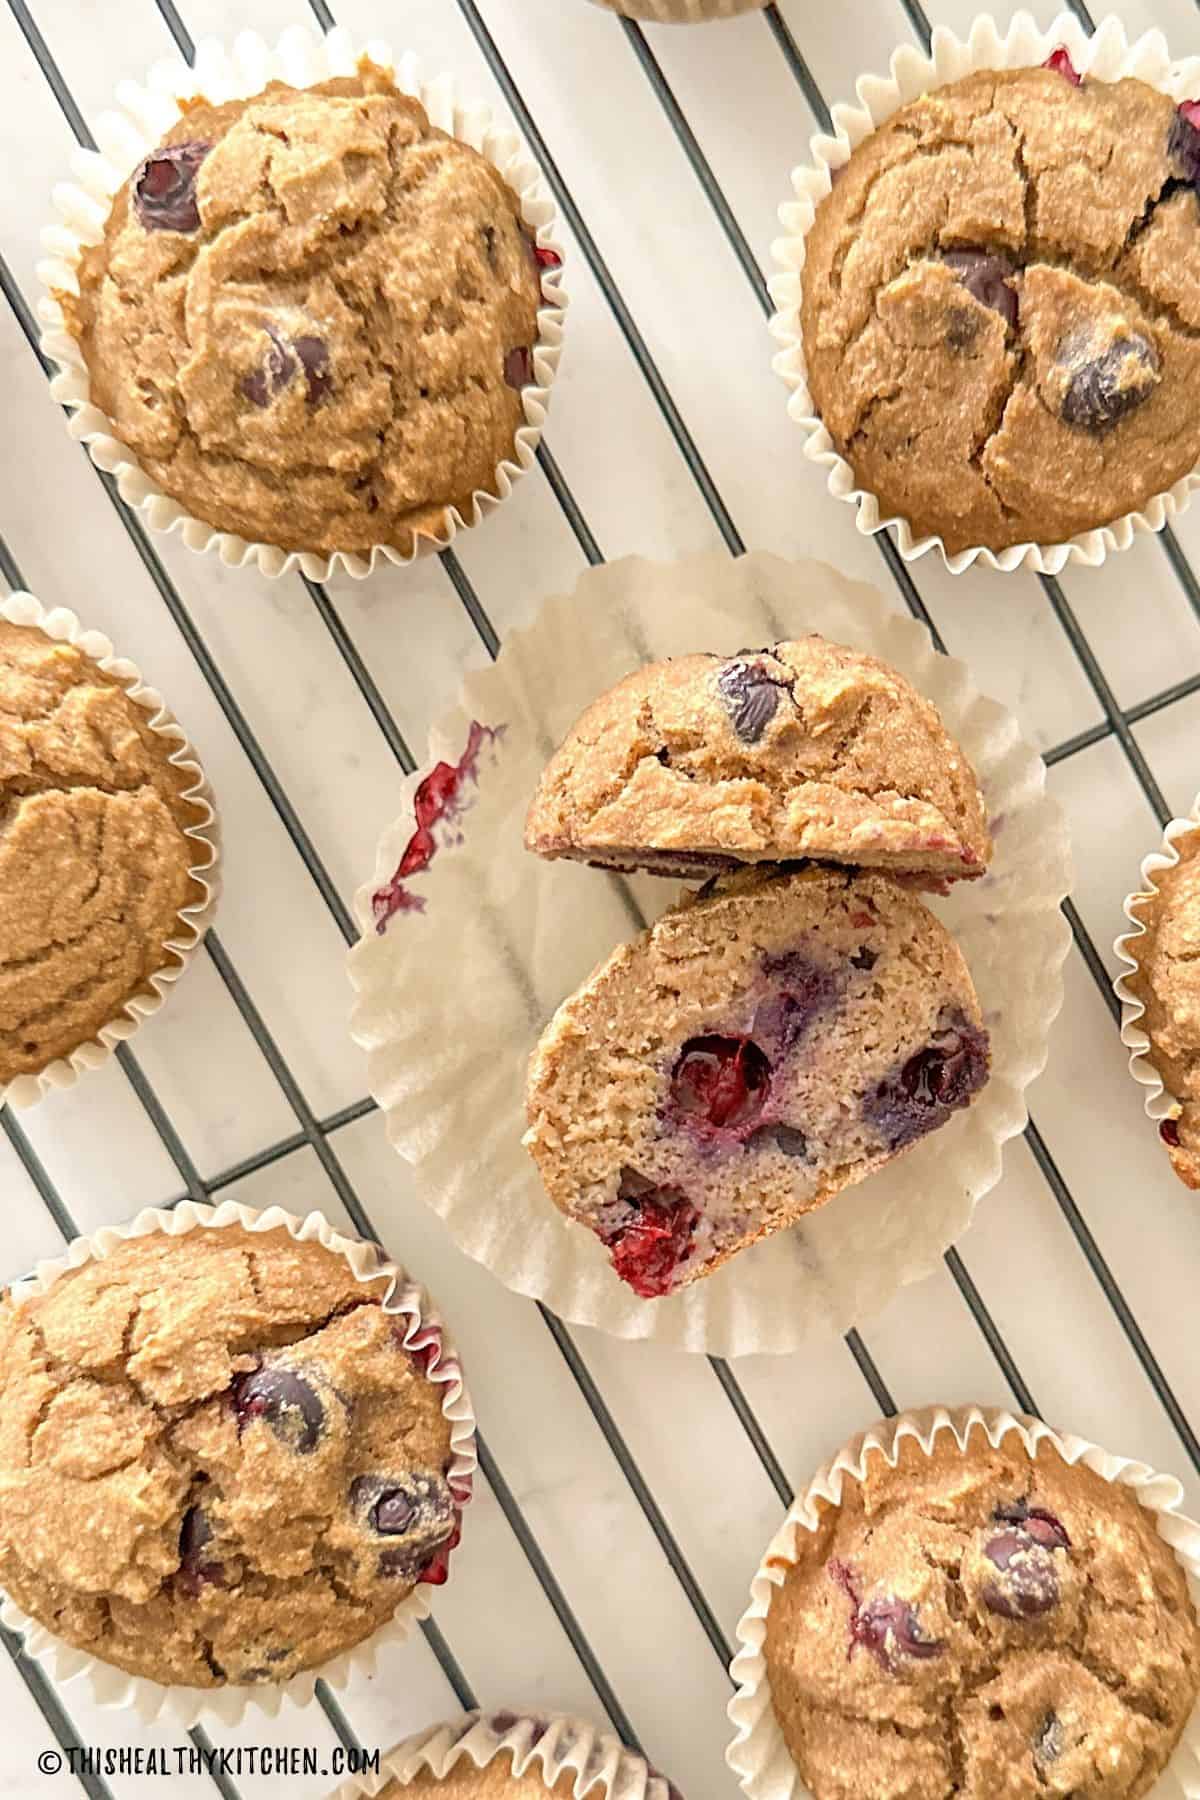 Muffin sliced in half on wire rack with more muffins all around it.